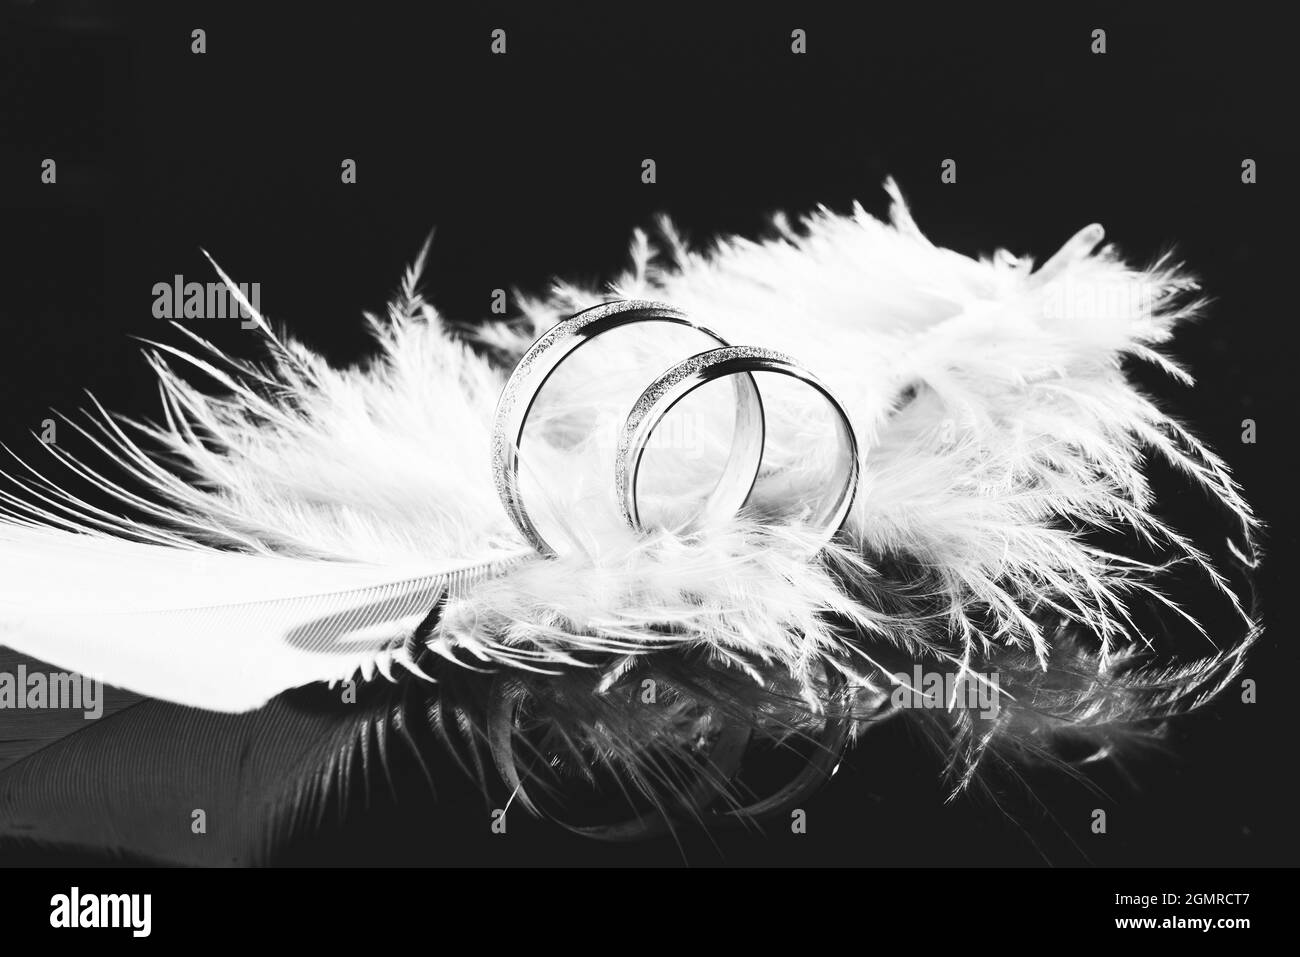 Two Wedding Rings and Feather,background for marriage. wedding rings on a black background with feathers. Love and wedding concept. Stock Photo